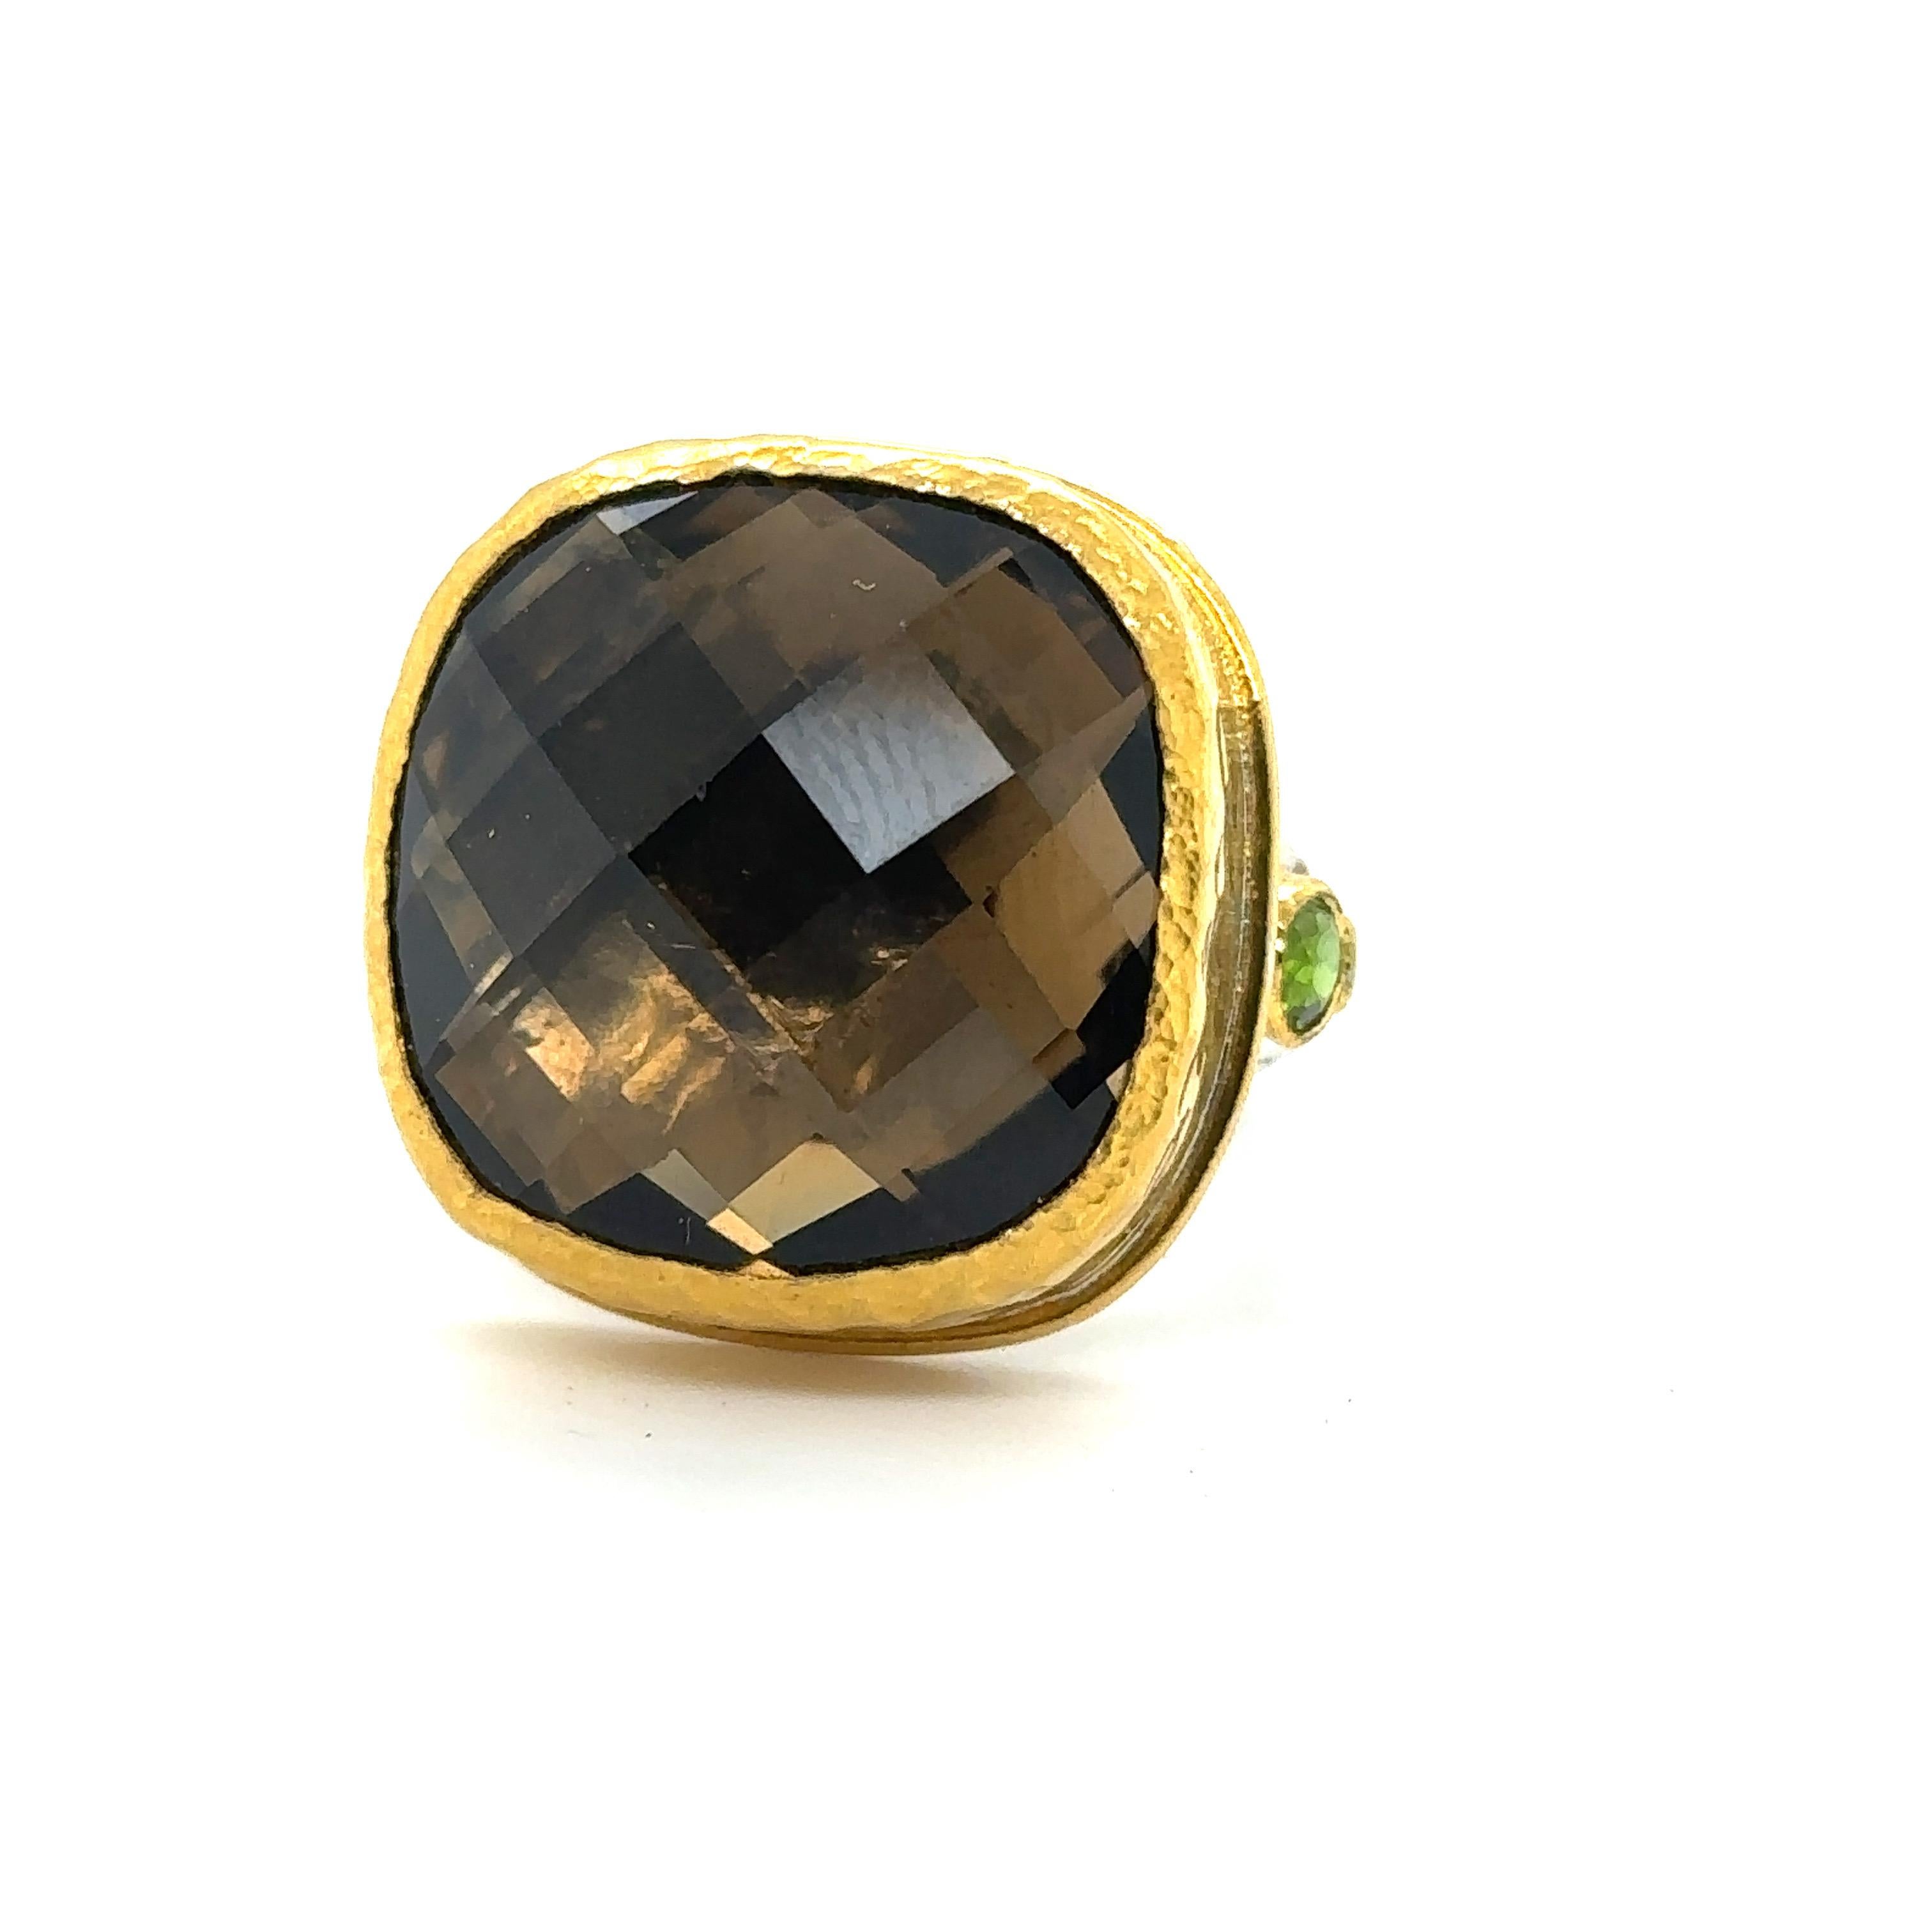 JAS-19-1993-24KT GOLD/SS with CUSHION CUT SMOKY QUARTZ & CHROME DIOPSIDES For Sale 5